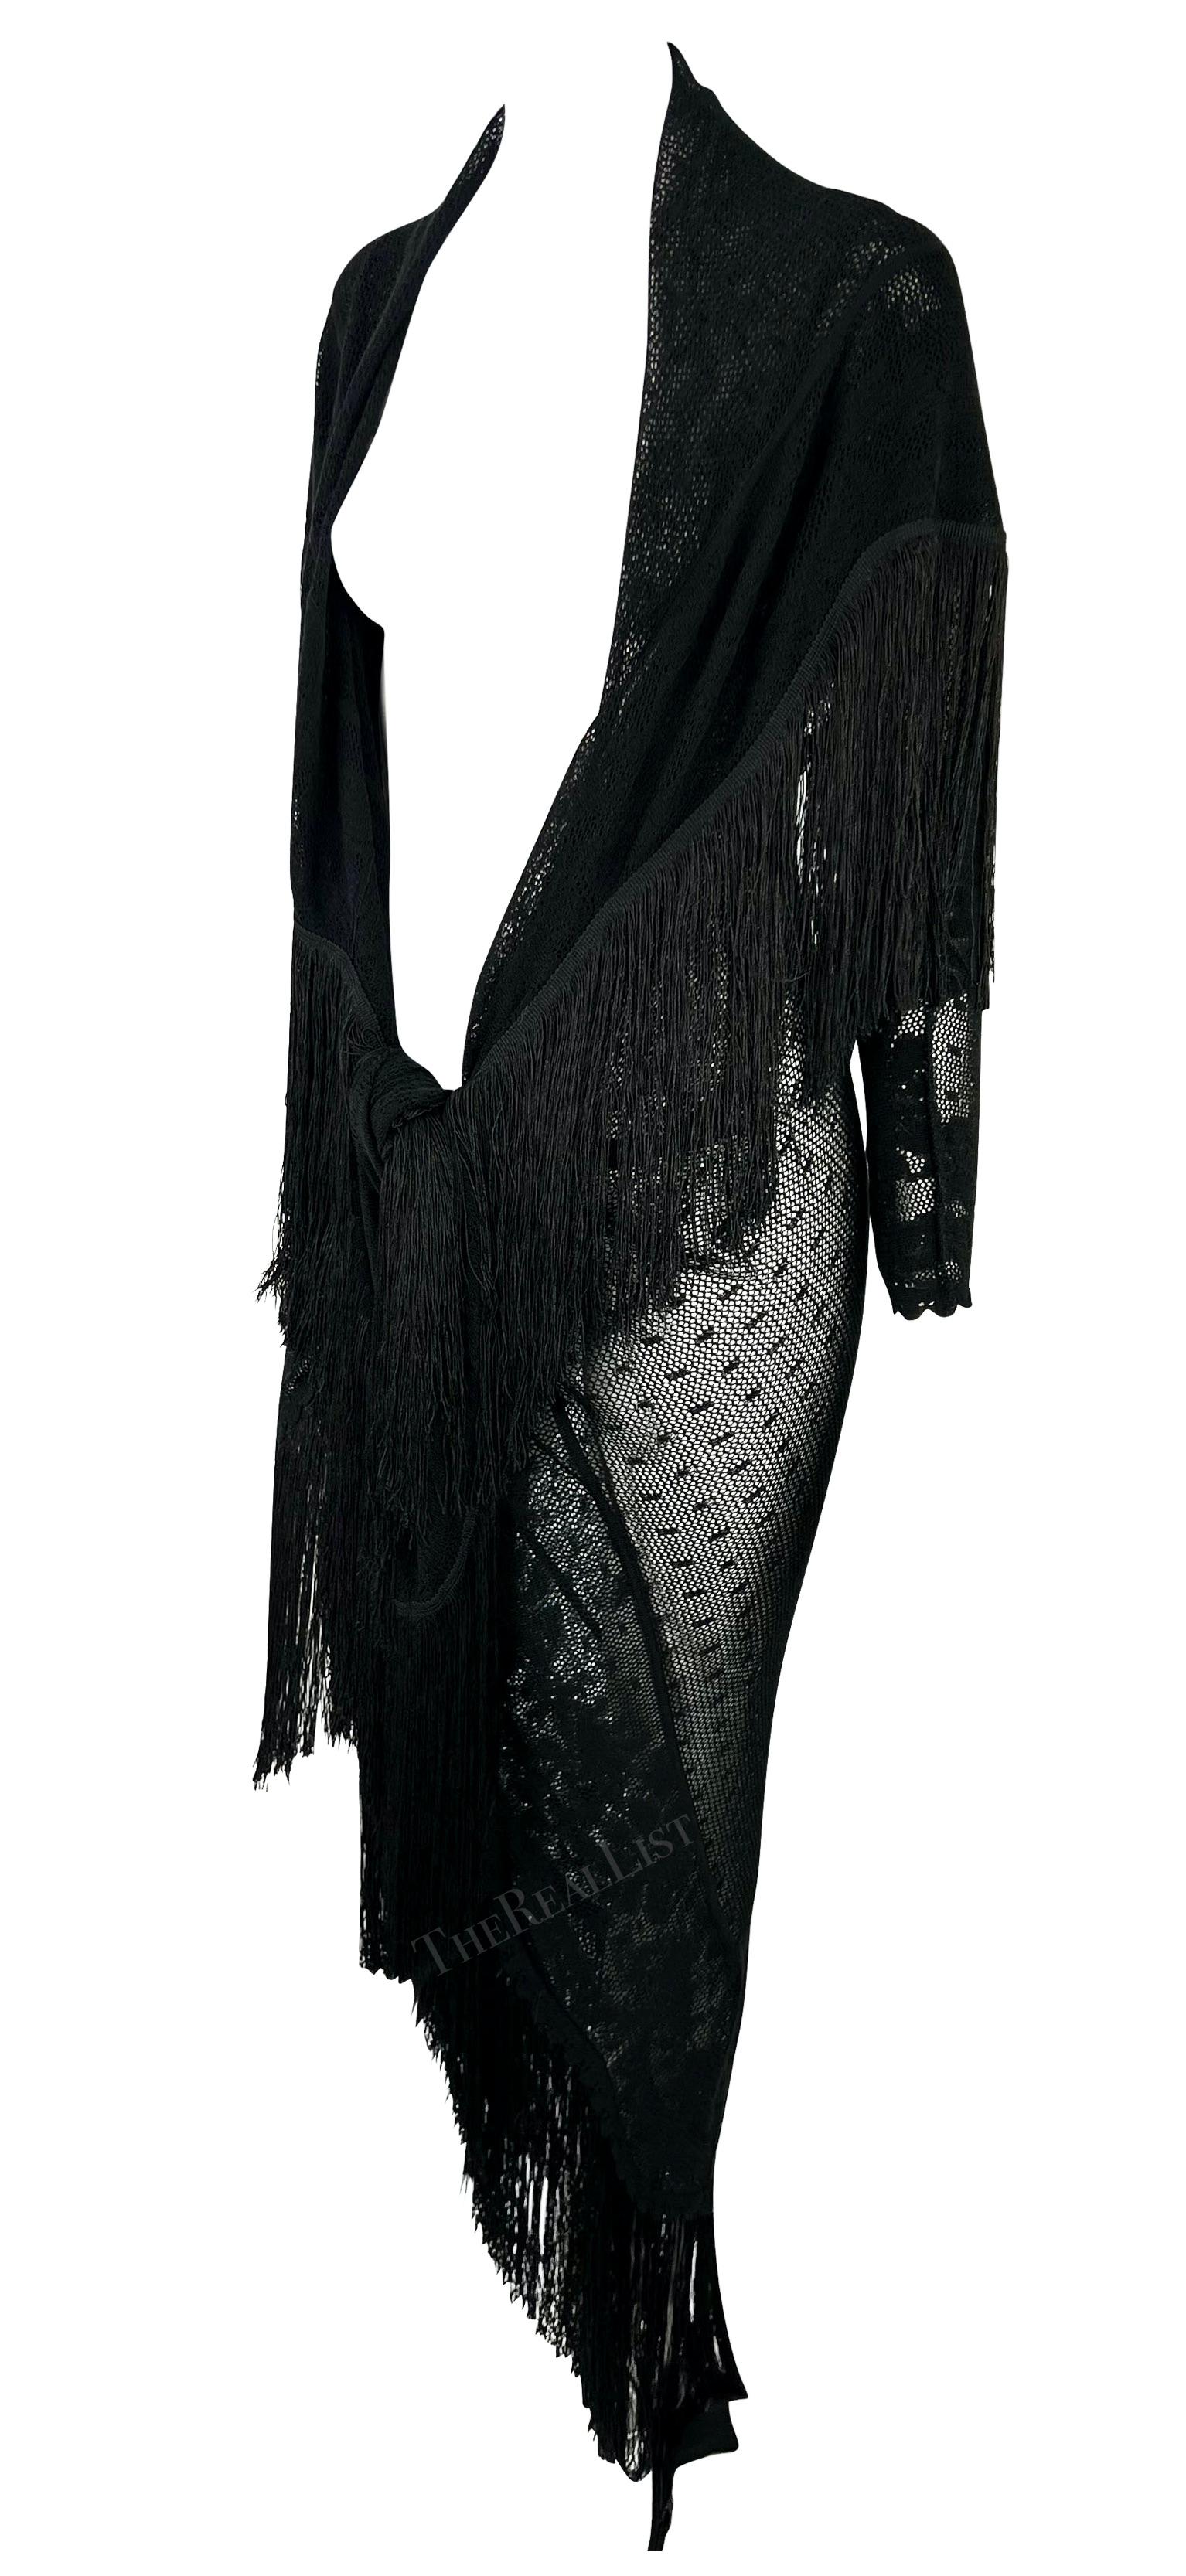 S/S 1997 John Galliano Runway Sheer Black Fringe Lace Flamenco Shawl  In Good Condition For Sale In West Hollywood, CA